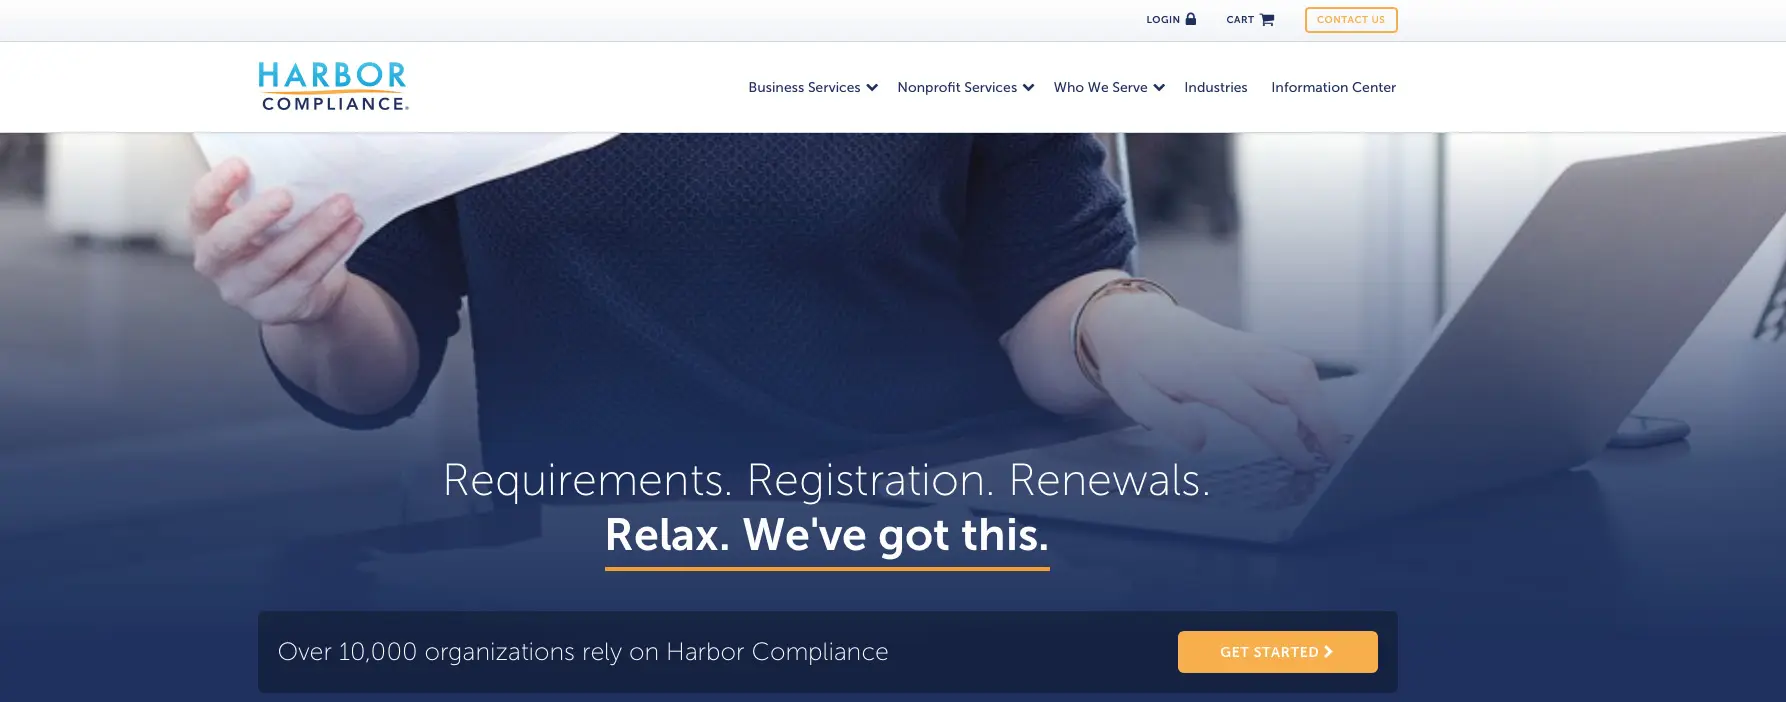 Harbor Compliance Home Page